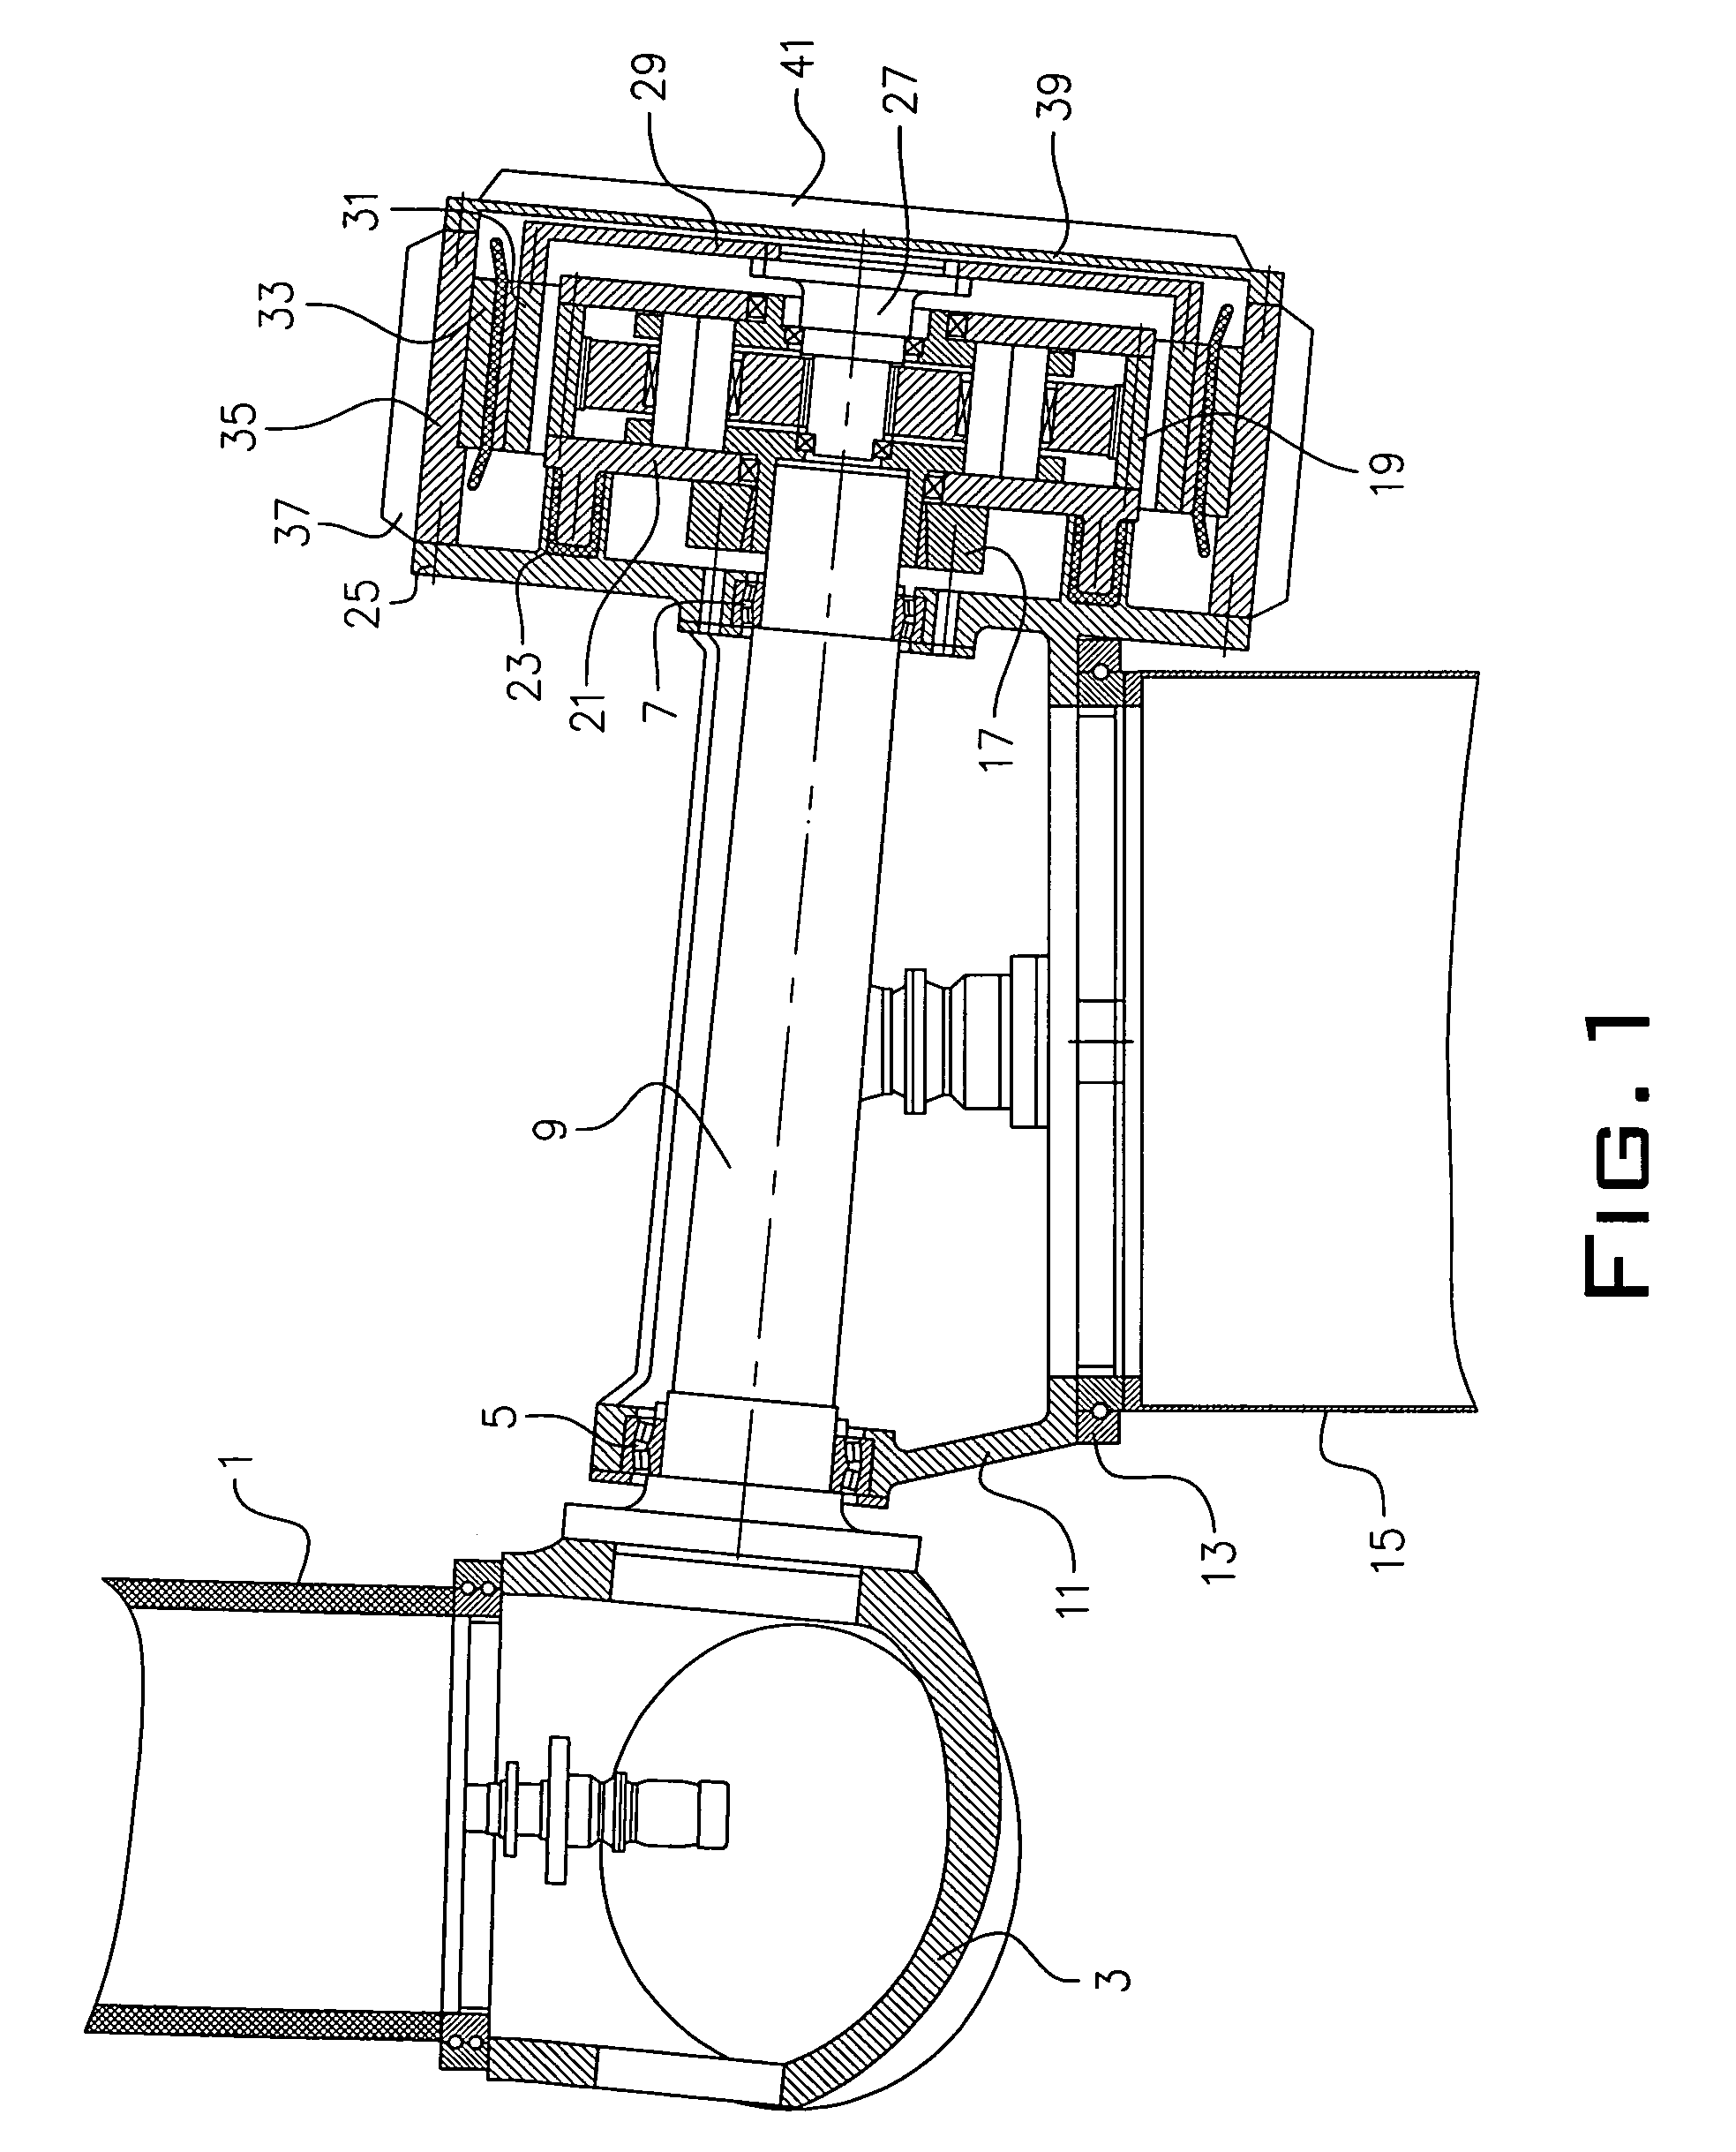 Wind energy installation comprising a concentric gearbox generator arrangement